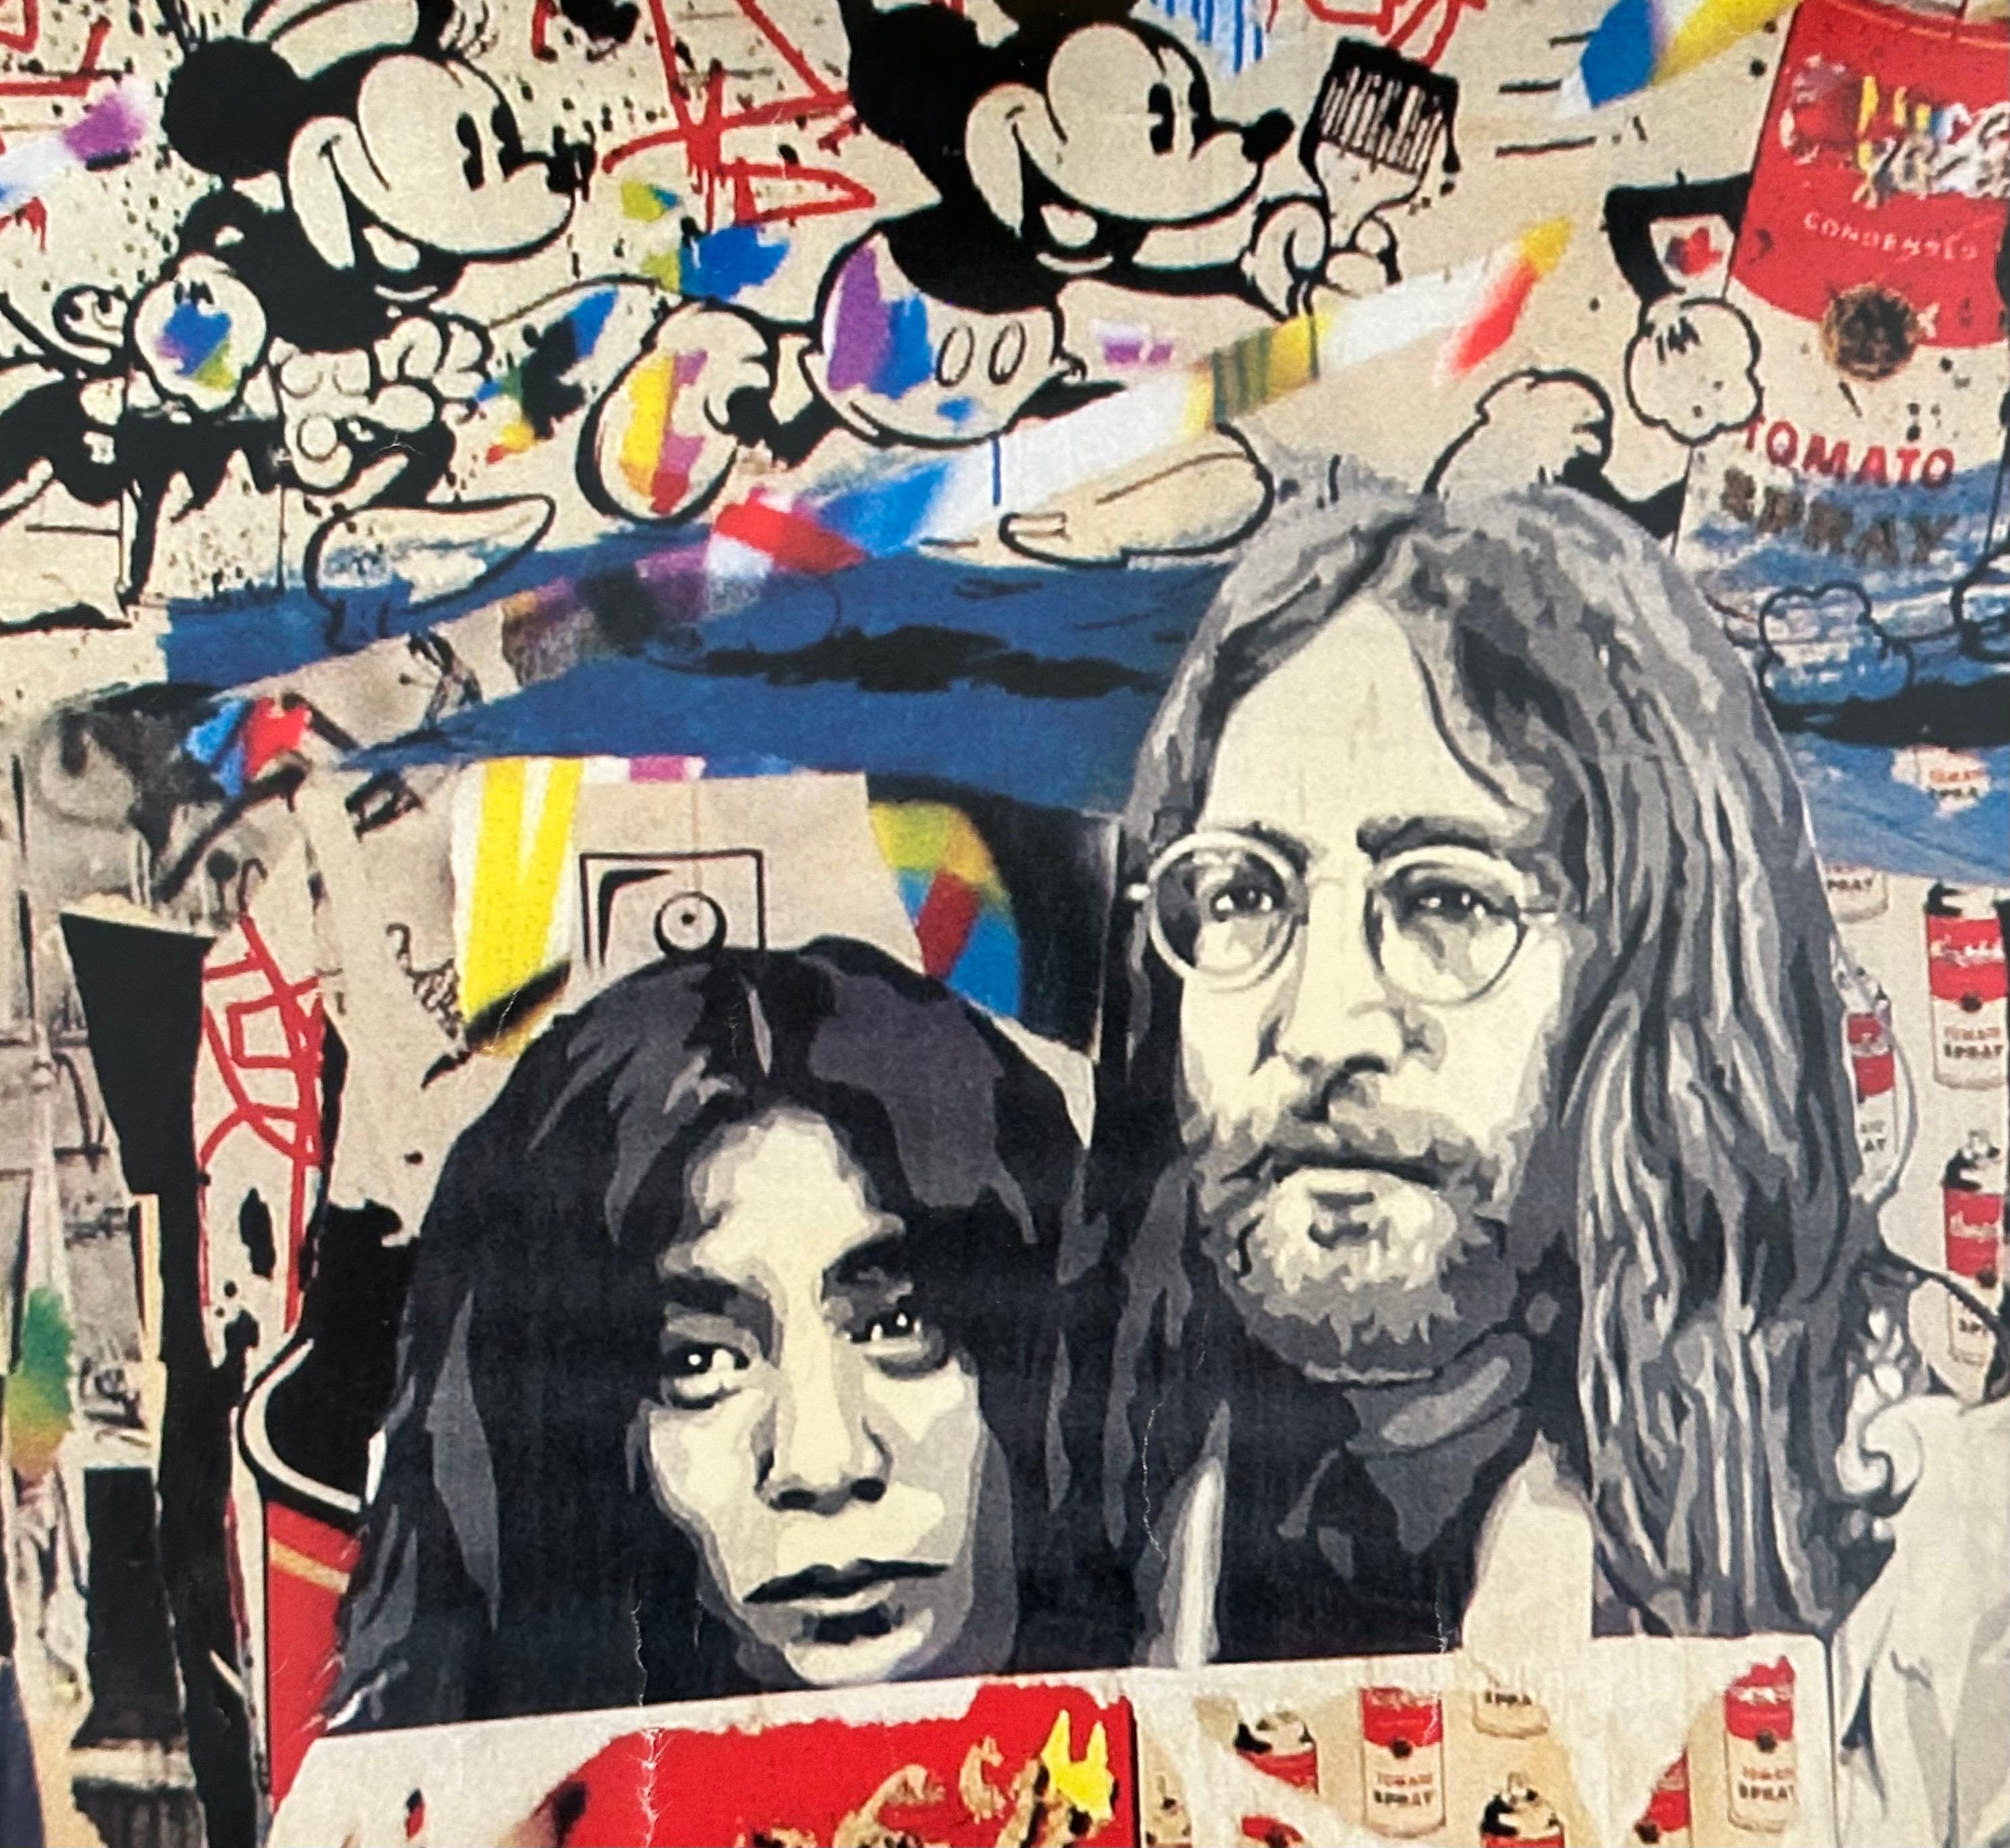 John Lennon & Yoko Ono Art Poster from the ICONS Exhibit by Mr. Brainwash For Sale 10